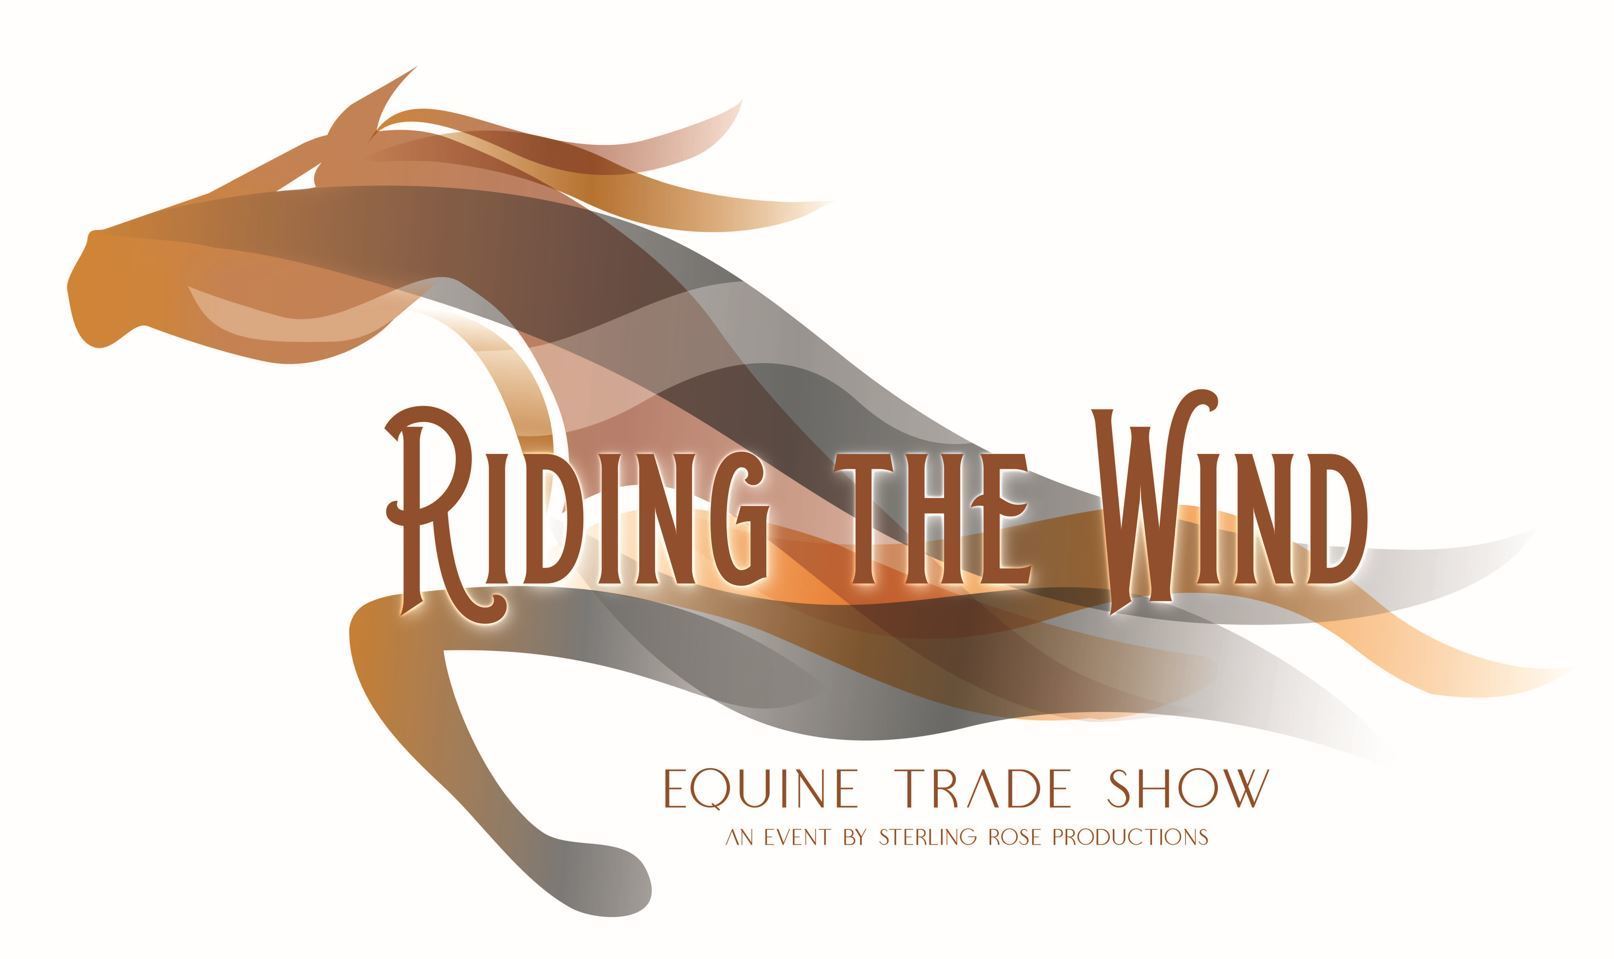 Riding the Wind Equine Trade Show, Great Falls, Montana, United States